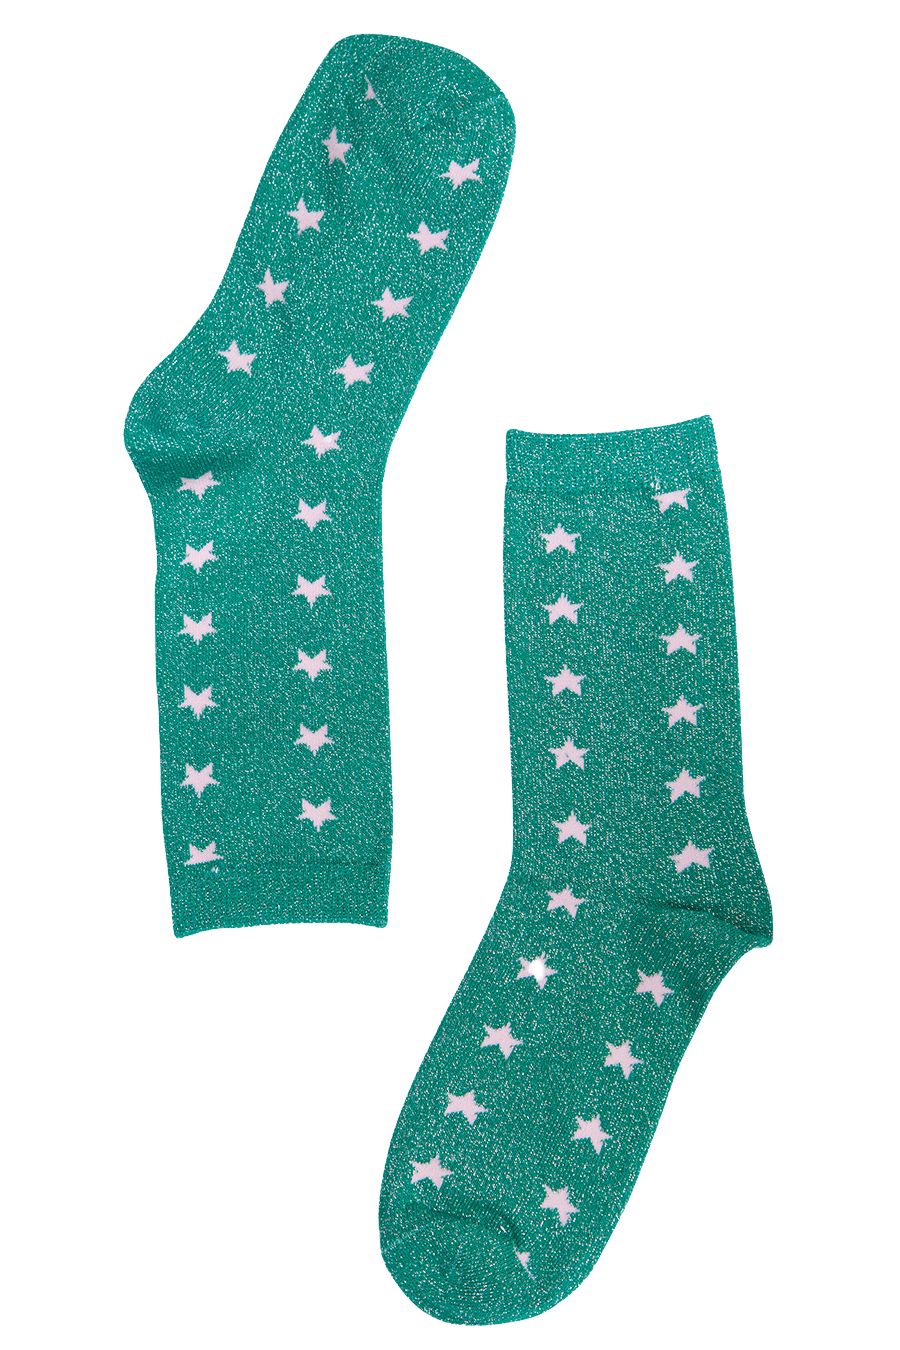 green and pink star print glitter ankle socks